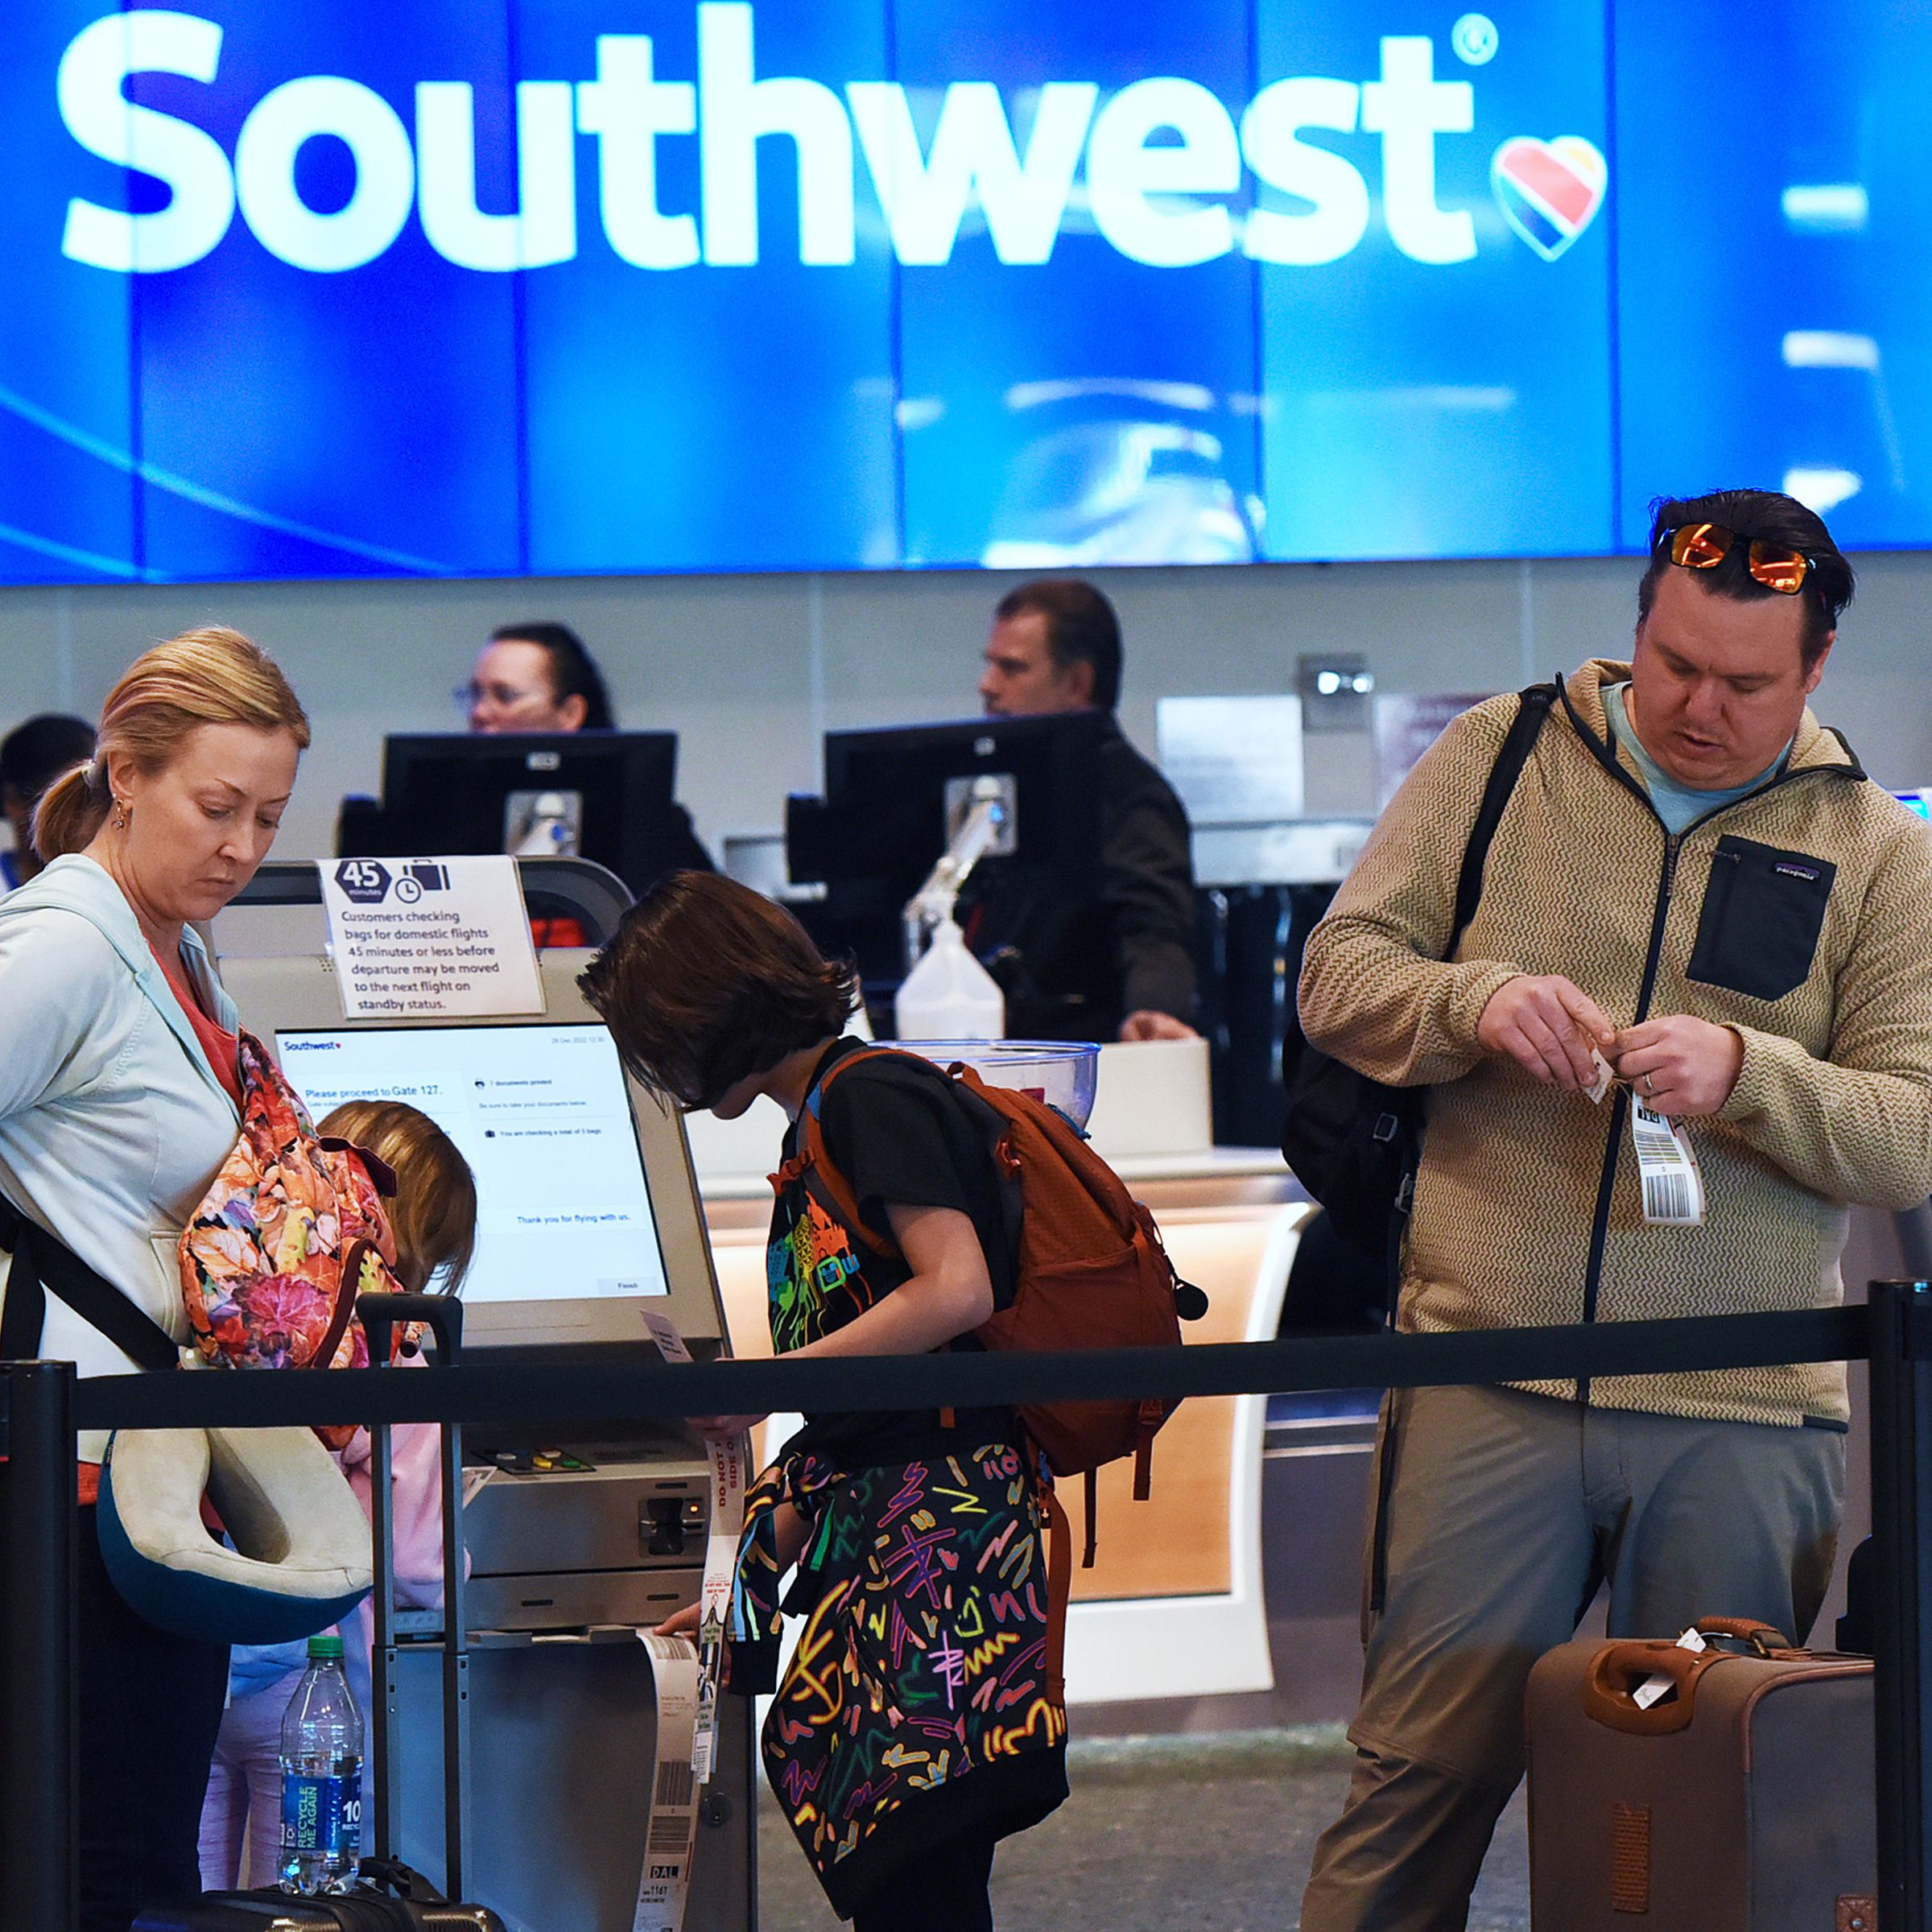 An image showing passengers in front of a Southwest Airlines kiosk at an airport